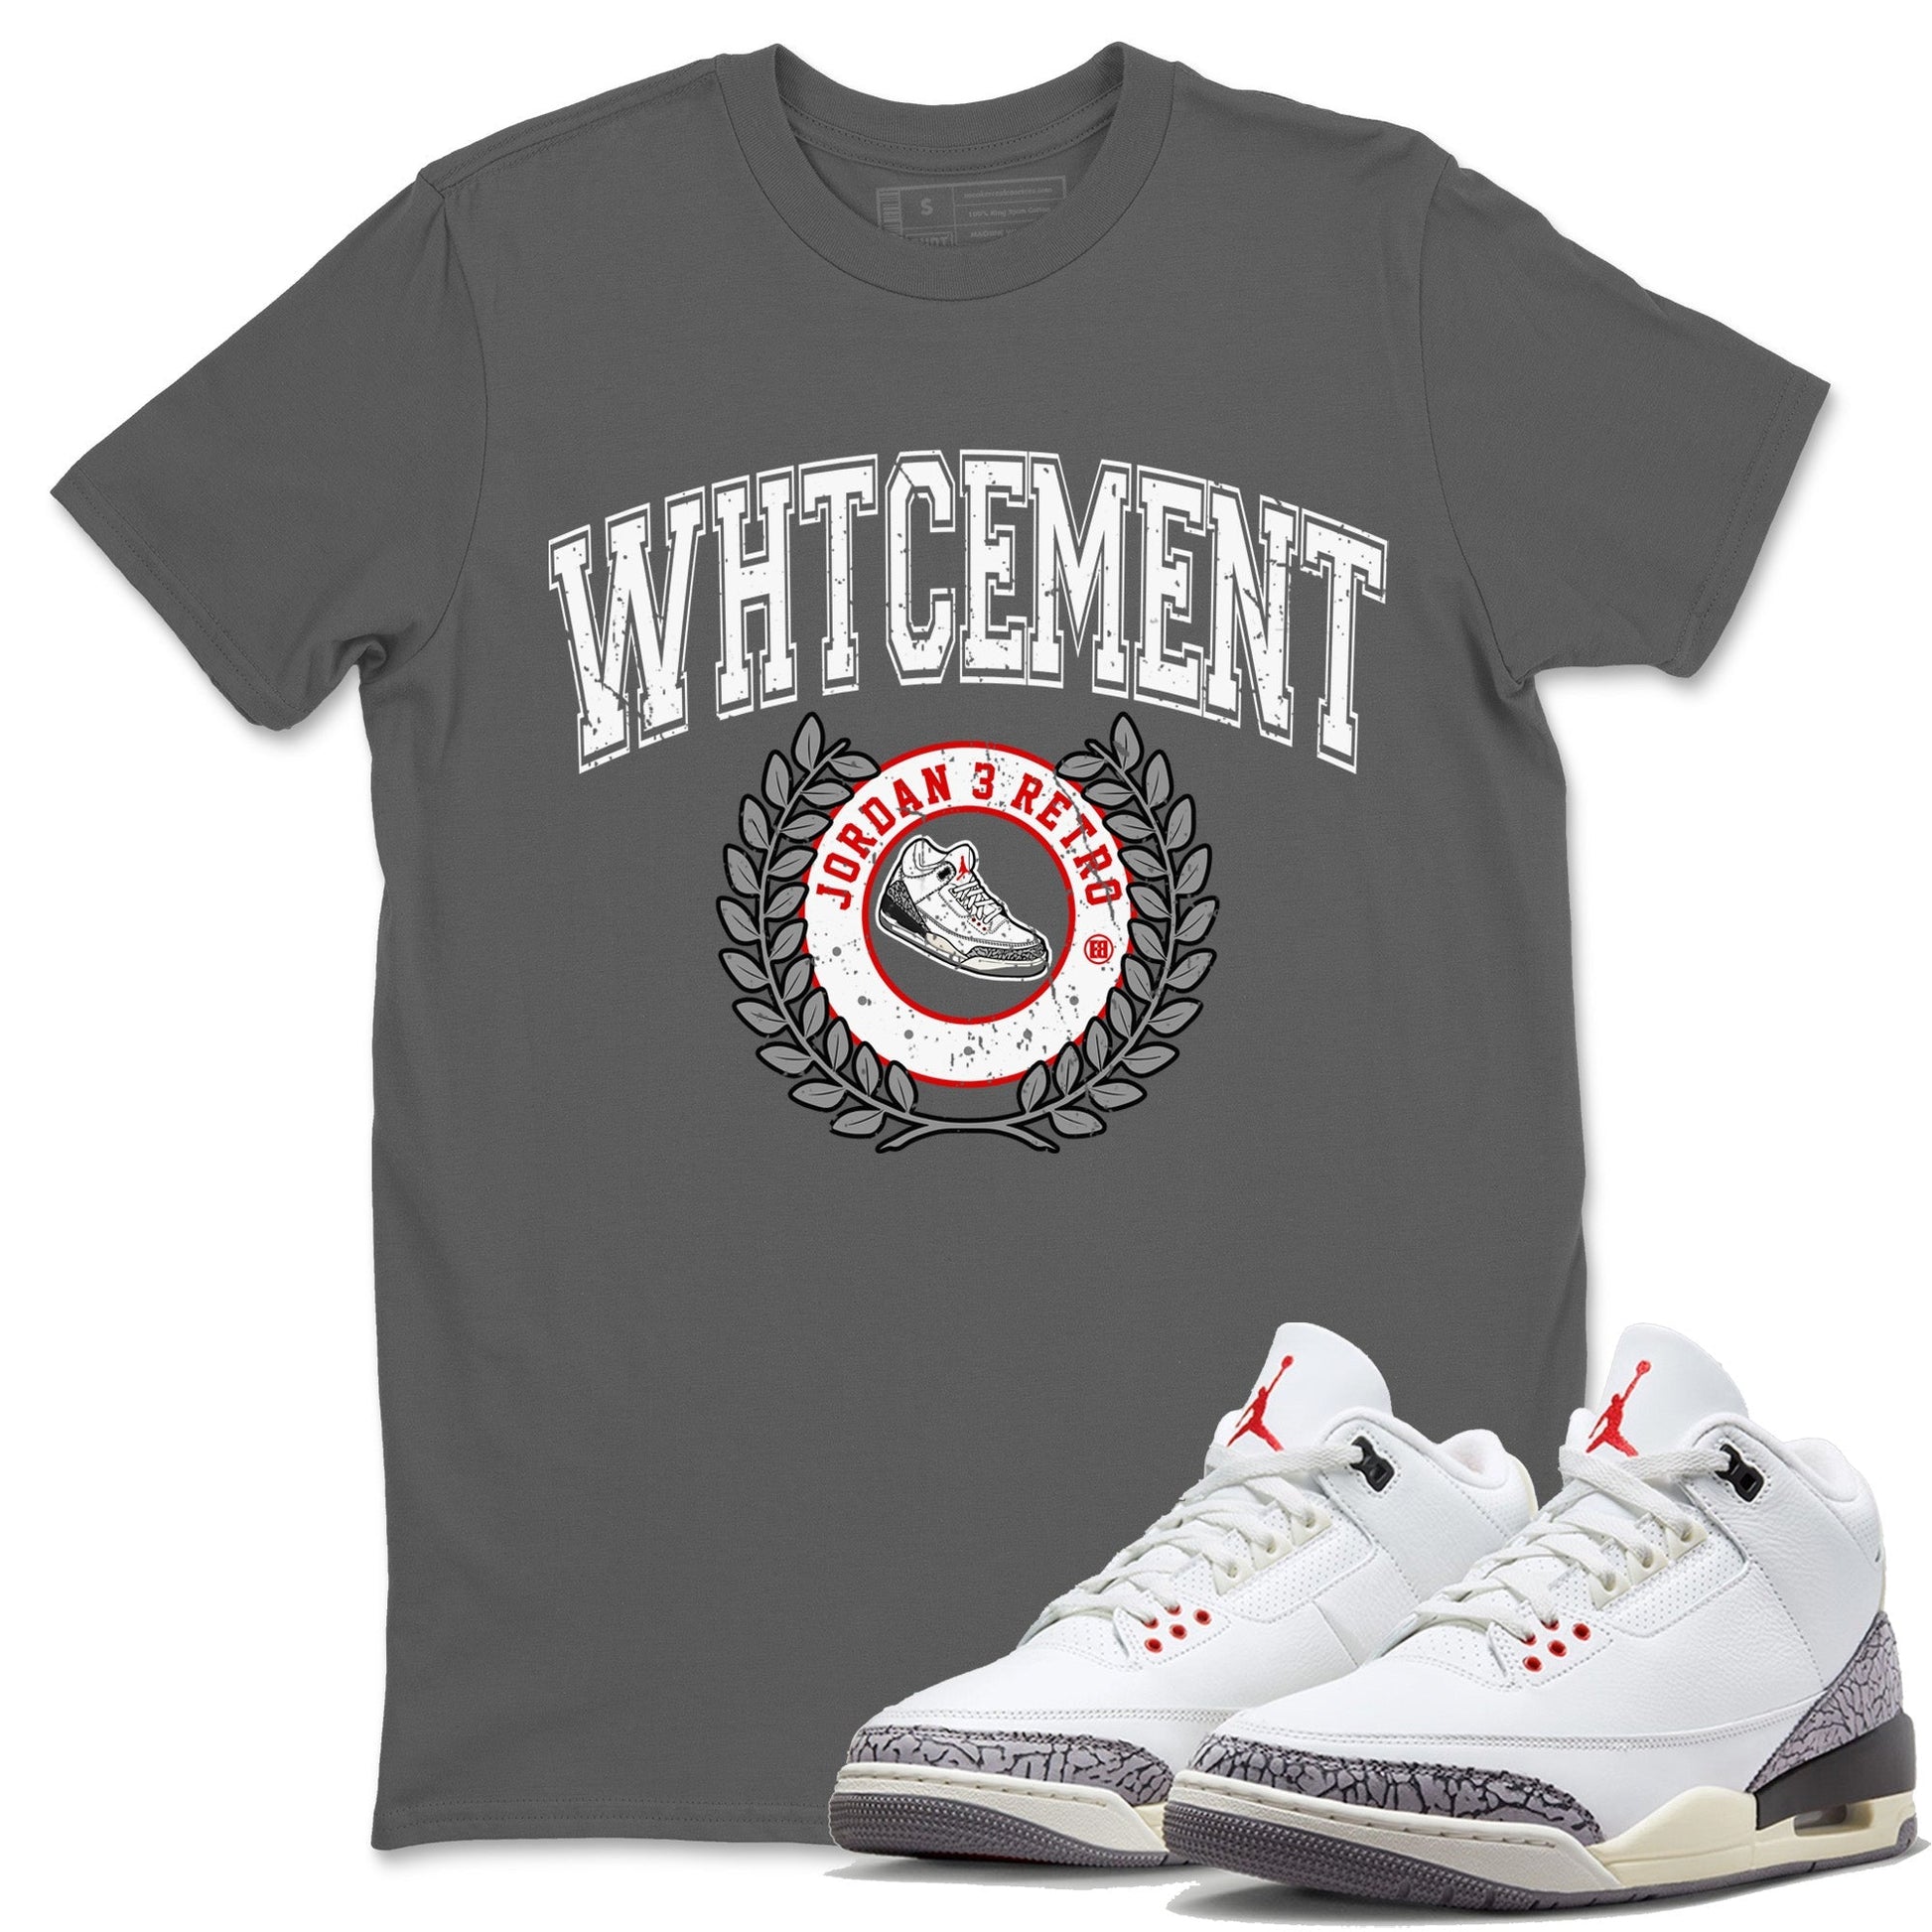 Air Jordan 3 White Cement Sneaker Letter Crew Neck Sneaker Tees Air Jordan 3 Retro White Cement Sneaker T-Shirts Washing and Care Tip